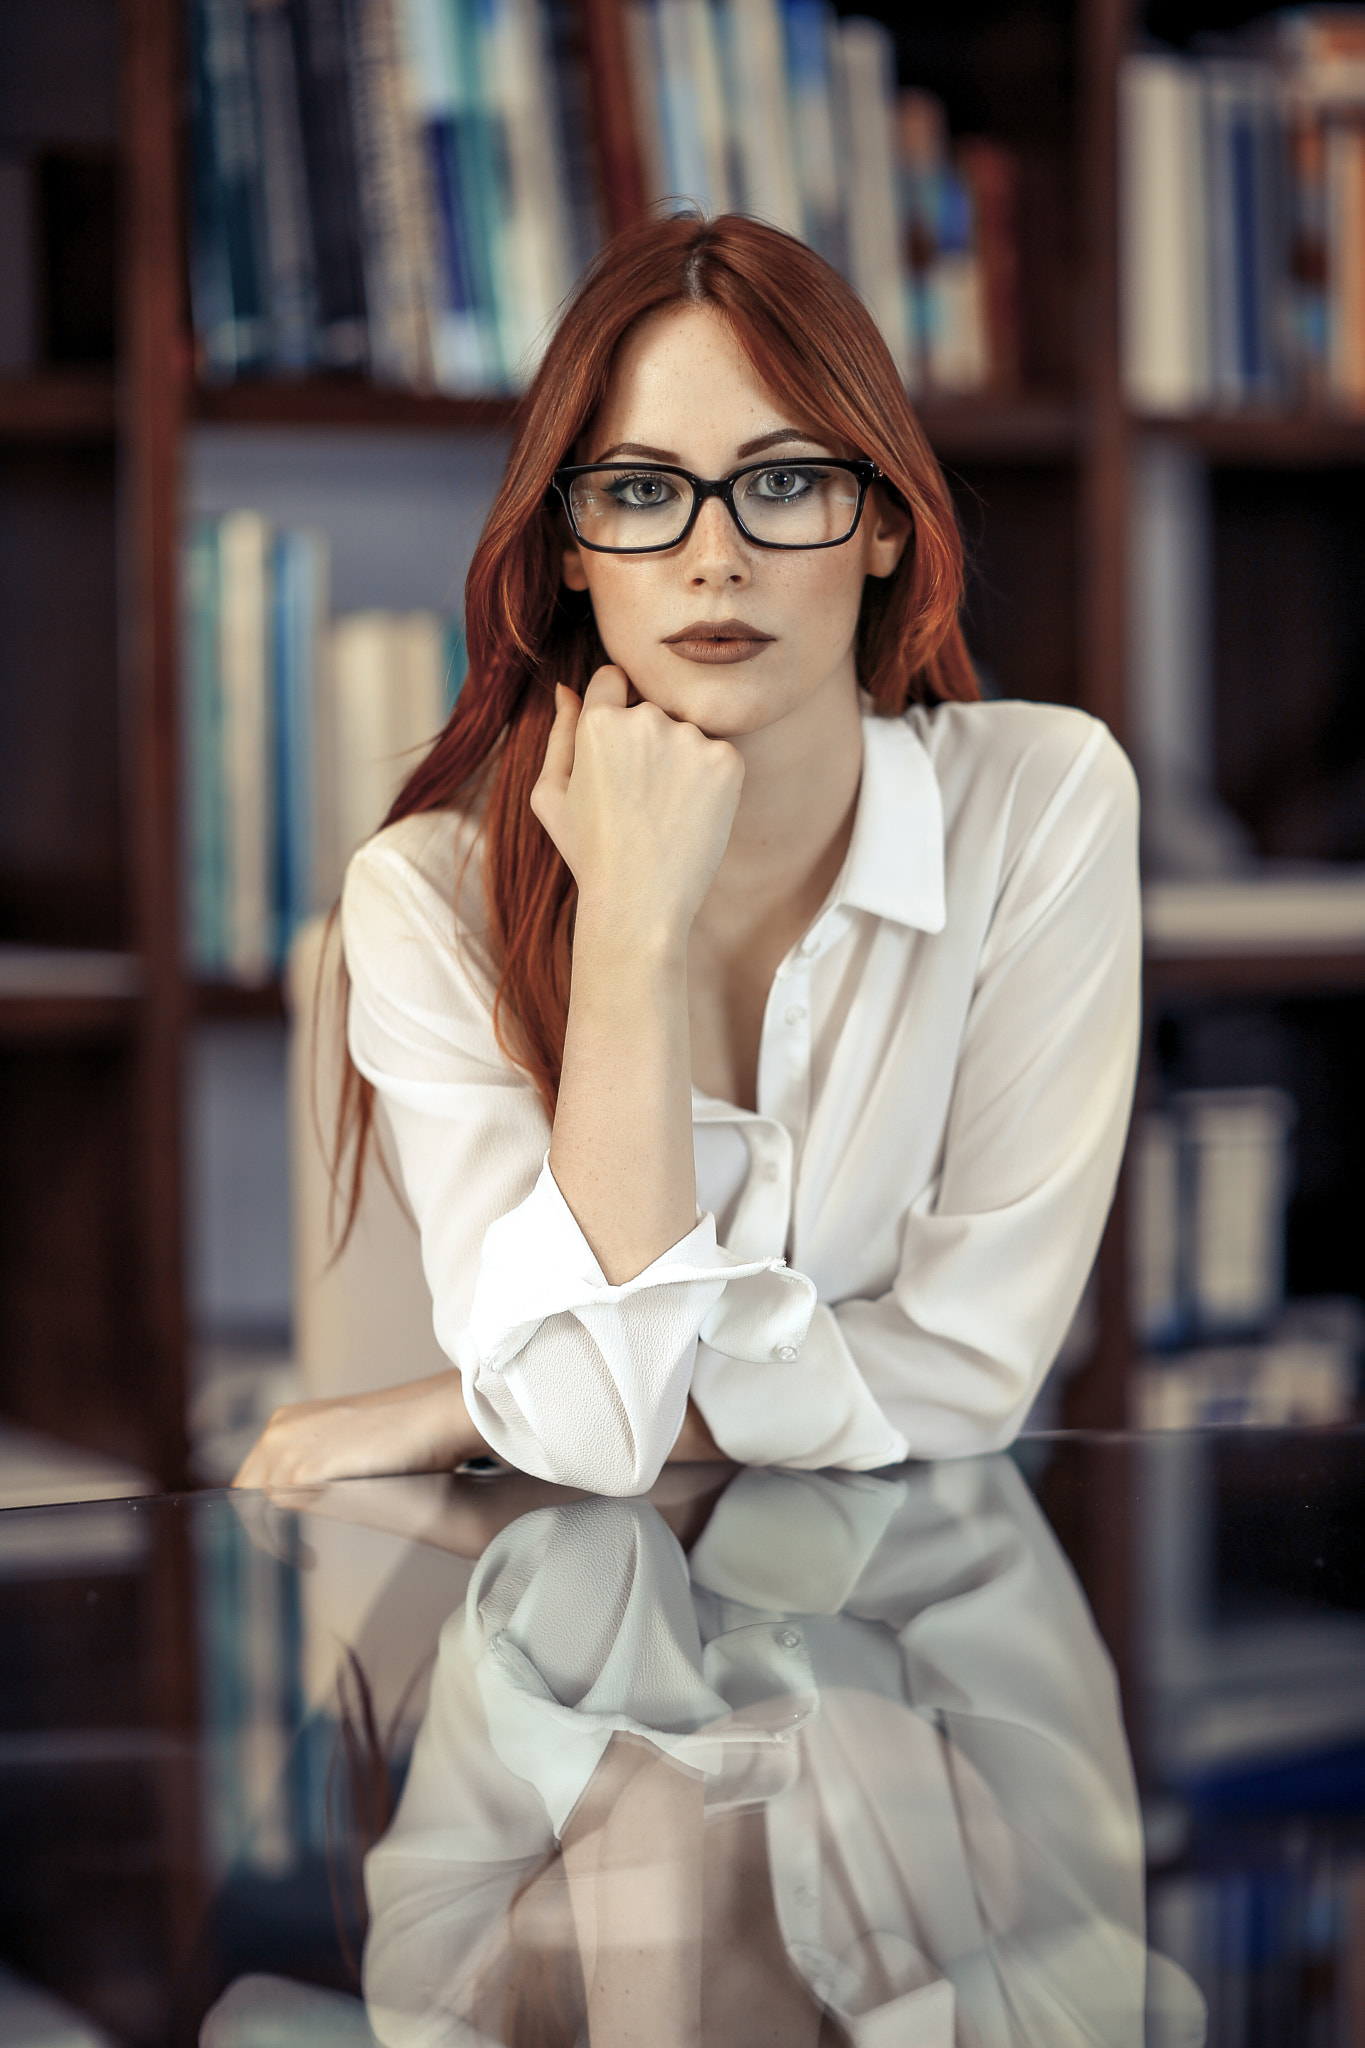 Alessandro Di Cicco Women Redhead Long Hair Glasses Freckles Library Reflection Resting Head Makeup  1365x2048